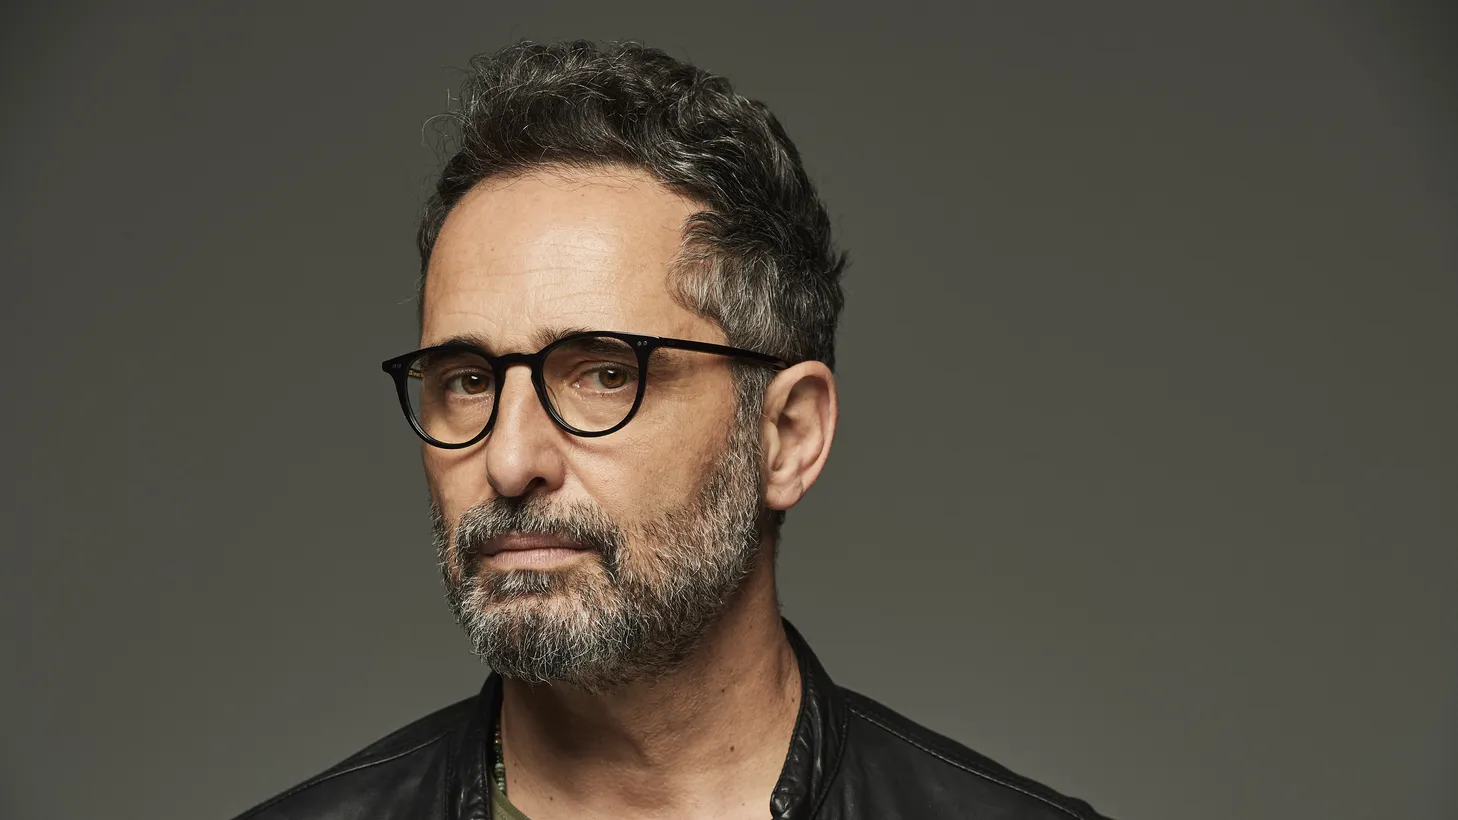 Uruguayan doctor-turned-musician Jorge Drexler shares his first album in five years, a return to the cosmopolitan poetic lyricism and crooning sound that made him an Academy Award and three-time Latin Grammy winner, featuring the tongue-twisting…